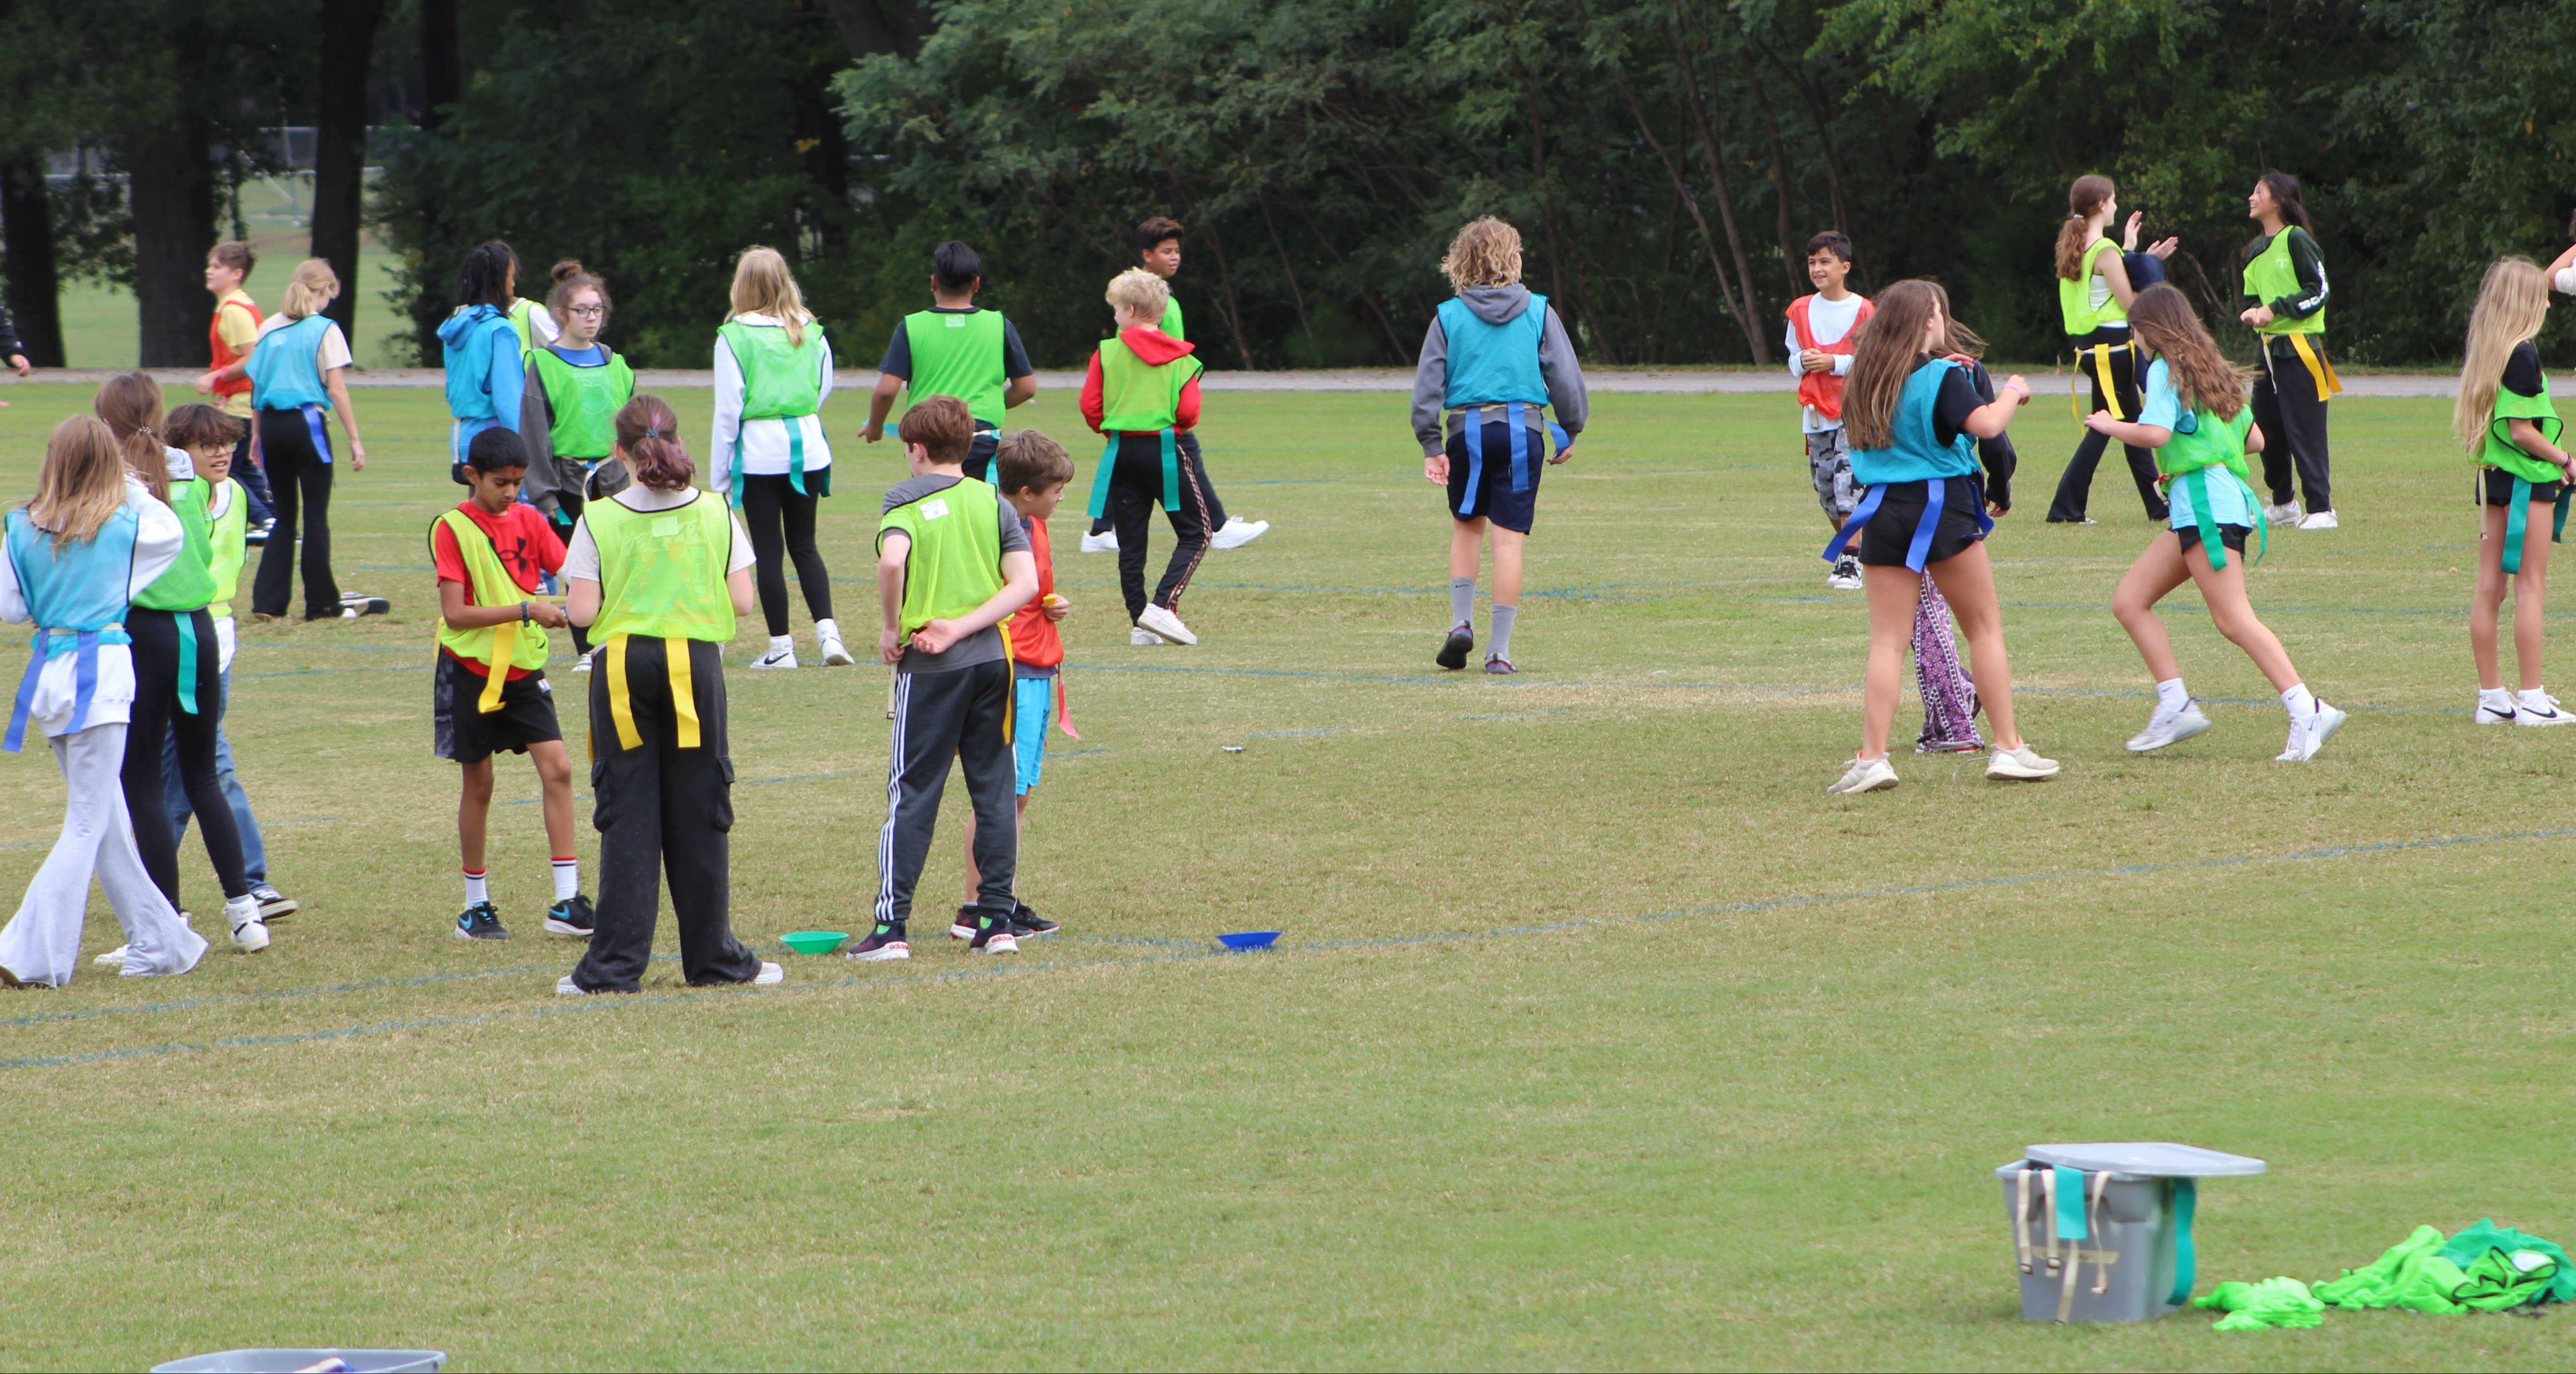 Students playing flag football on the school field